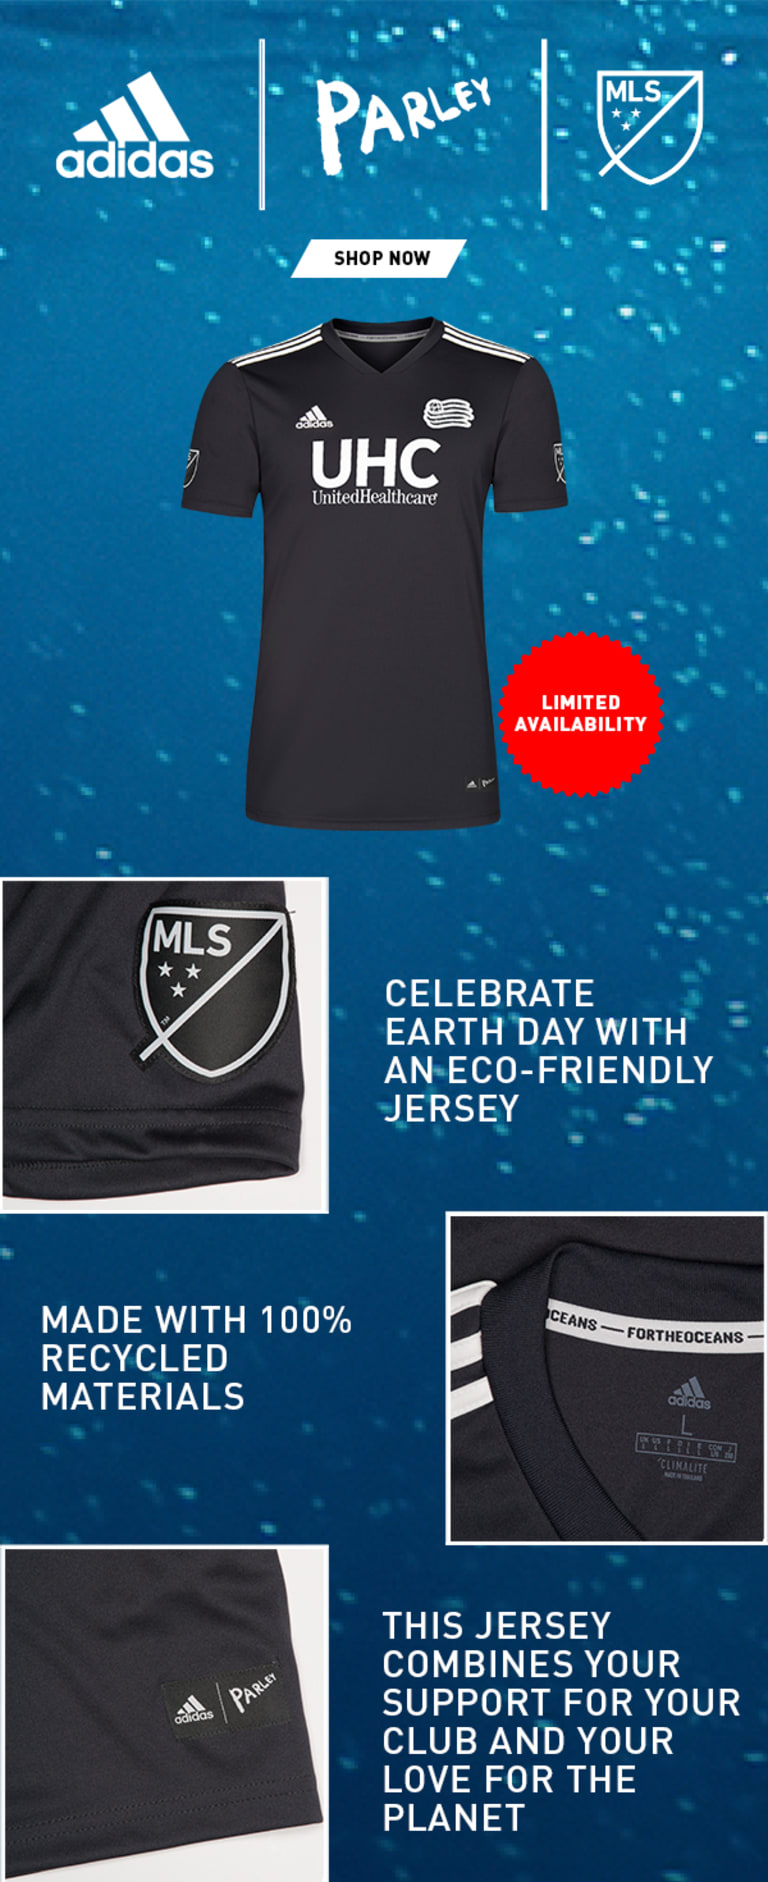 Revolution Parley Jerseys now available -